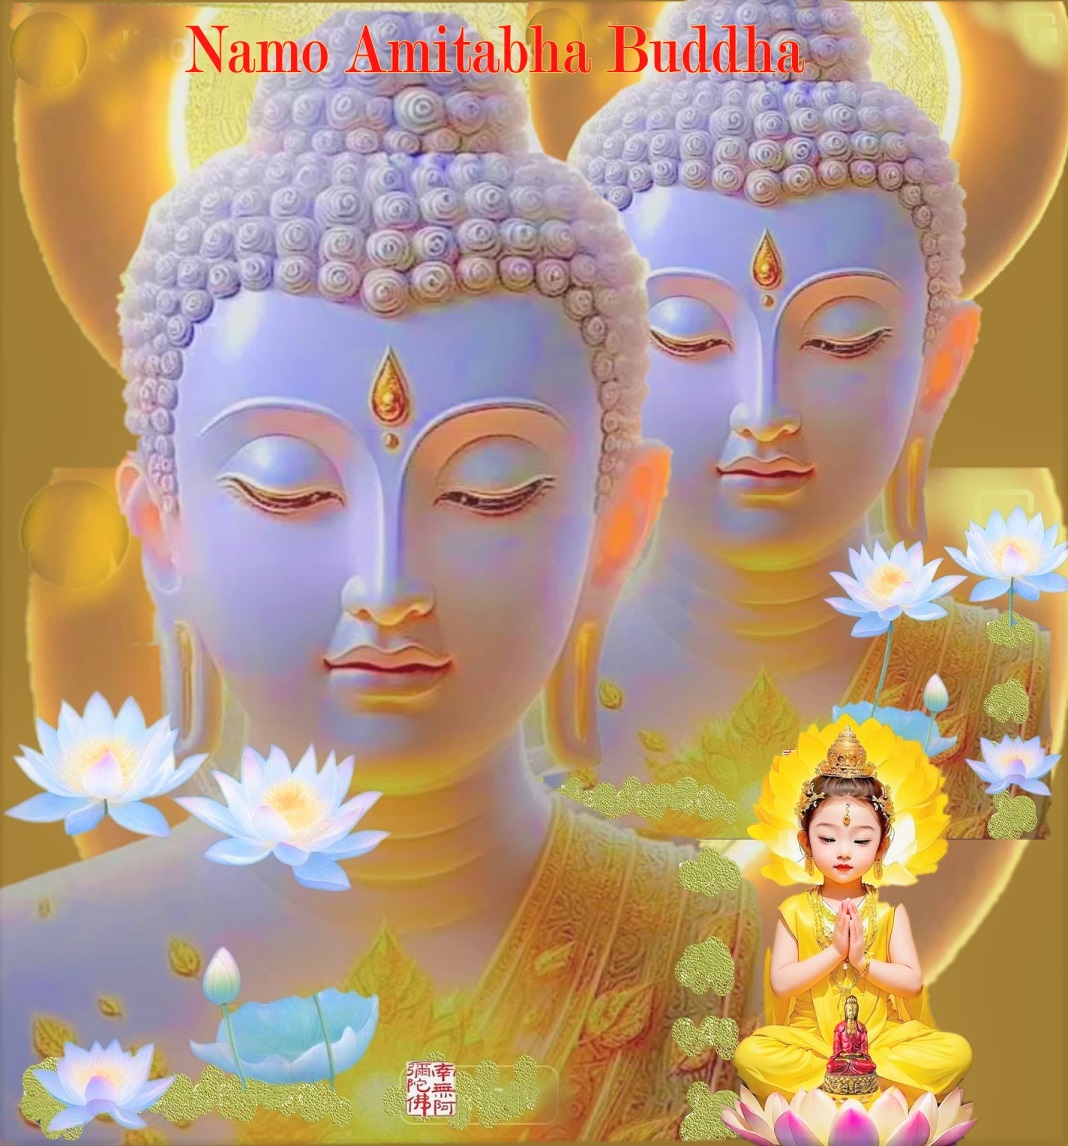 Anita Moorjani’s book on ’Dying to be Me’ reveals the unconditional Love of Amitabha Buddha